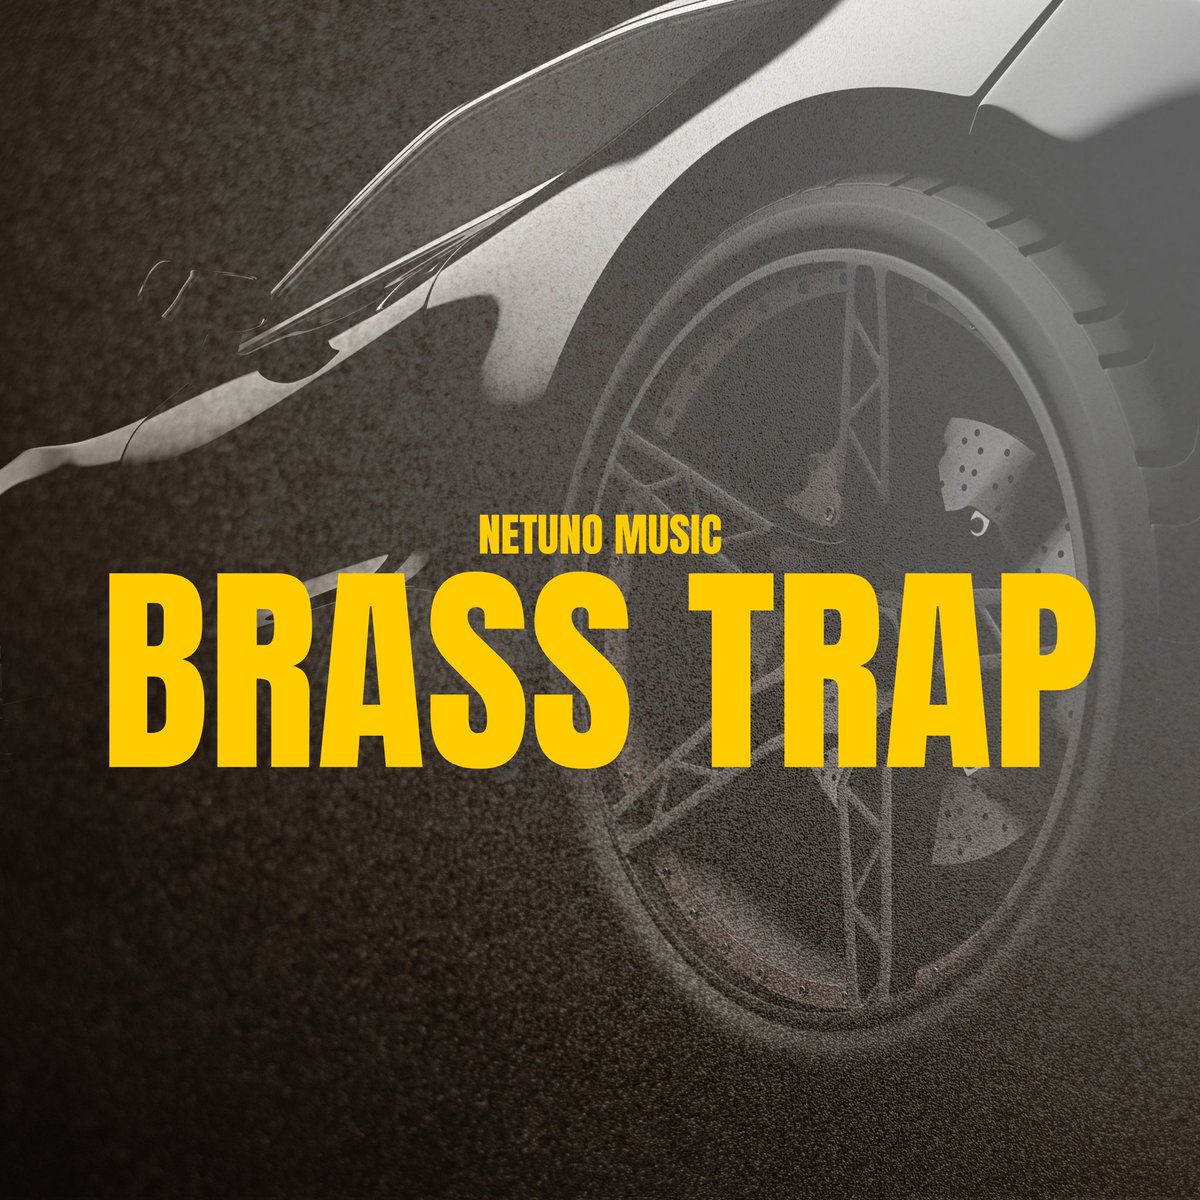 New Music Out Now 😎🎶⬇️

#BrassTrap #TrapMusic #BrassBeats #808Drums #EnergeticVibes #PartyAnthems #DanceFloorReady #MusicGrooves #SizzlingSounds #MusicalFusion #HighEnergy #ElectrifyingBeats #LetTheMusicMoveYou #SoundtrackOfTheDay #PlaylistEssentials